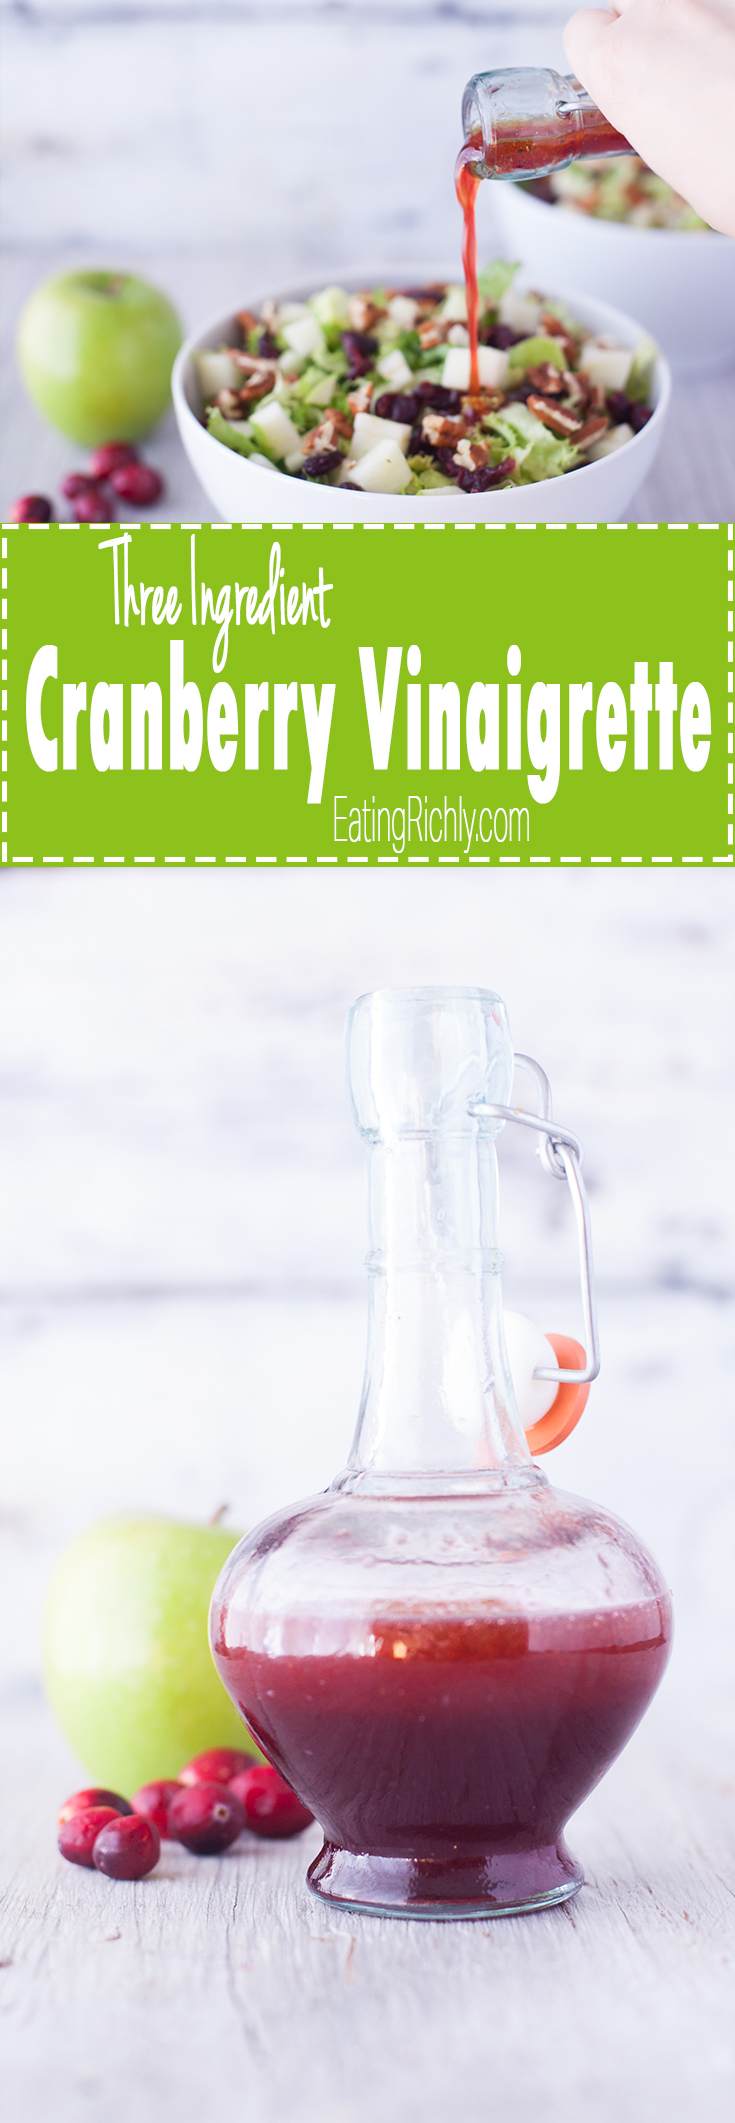 This easy cranberry vinaigrette recipe has just 3 ingredients and will give a bright and tangy flavor to any salad you add it to. It's the perfect salad dressing! From EatingRichly.com